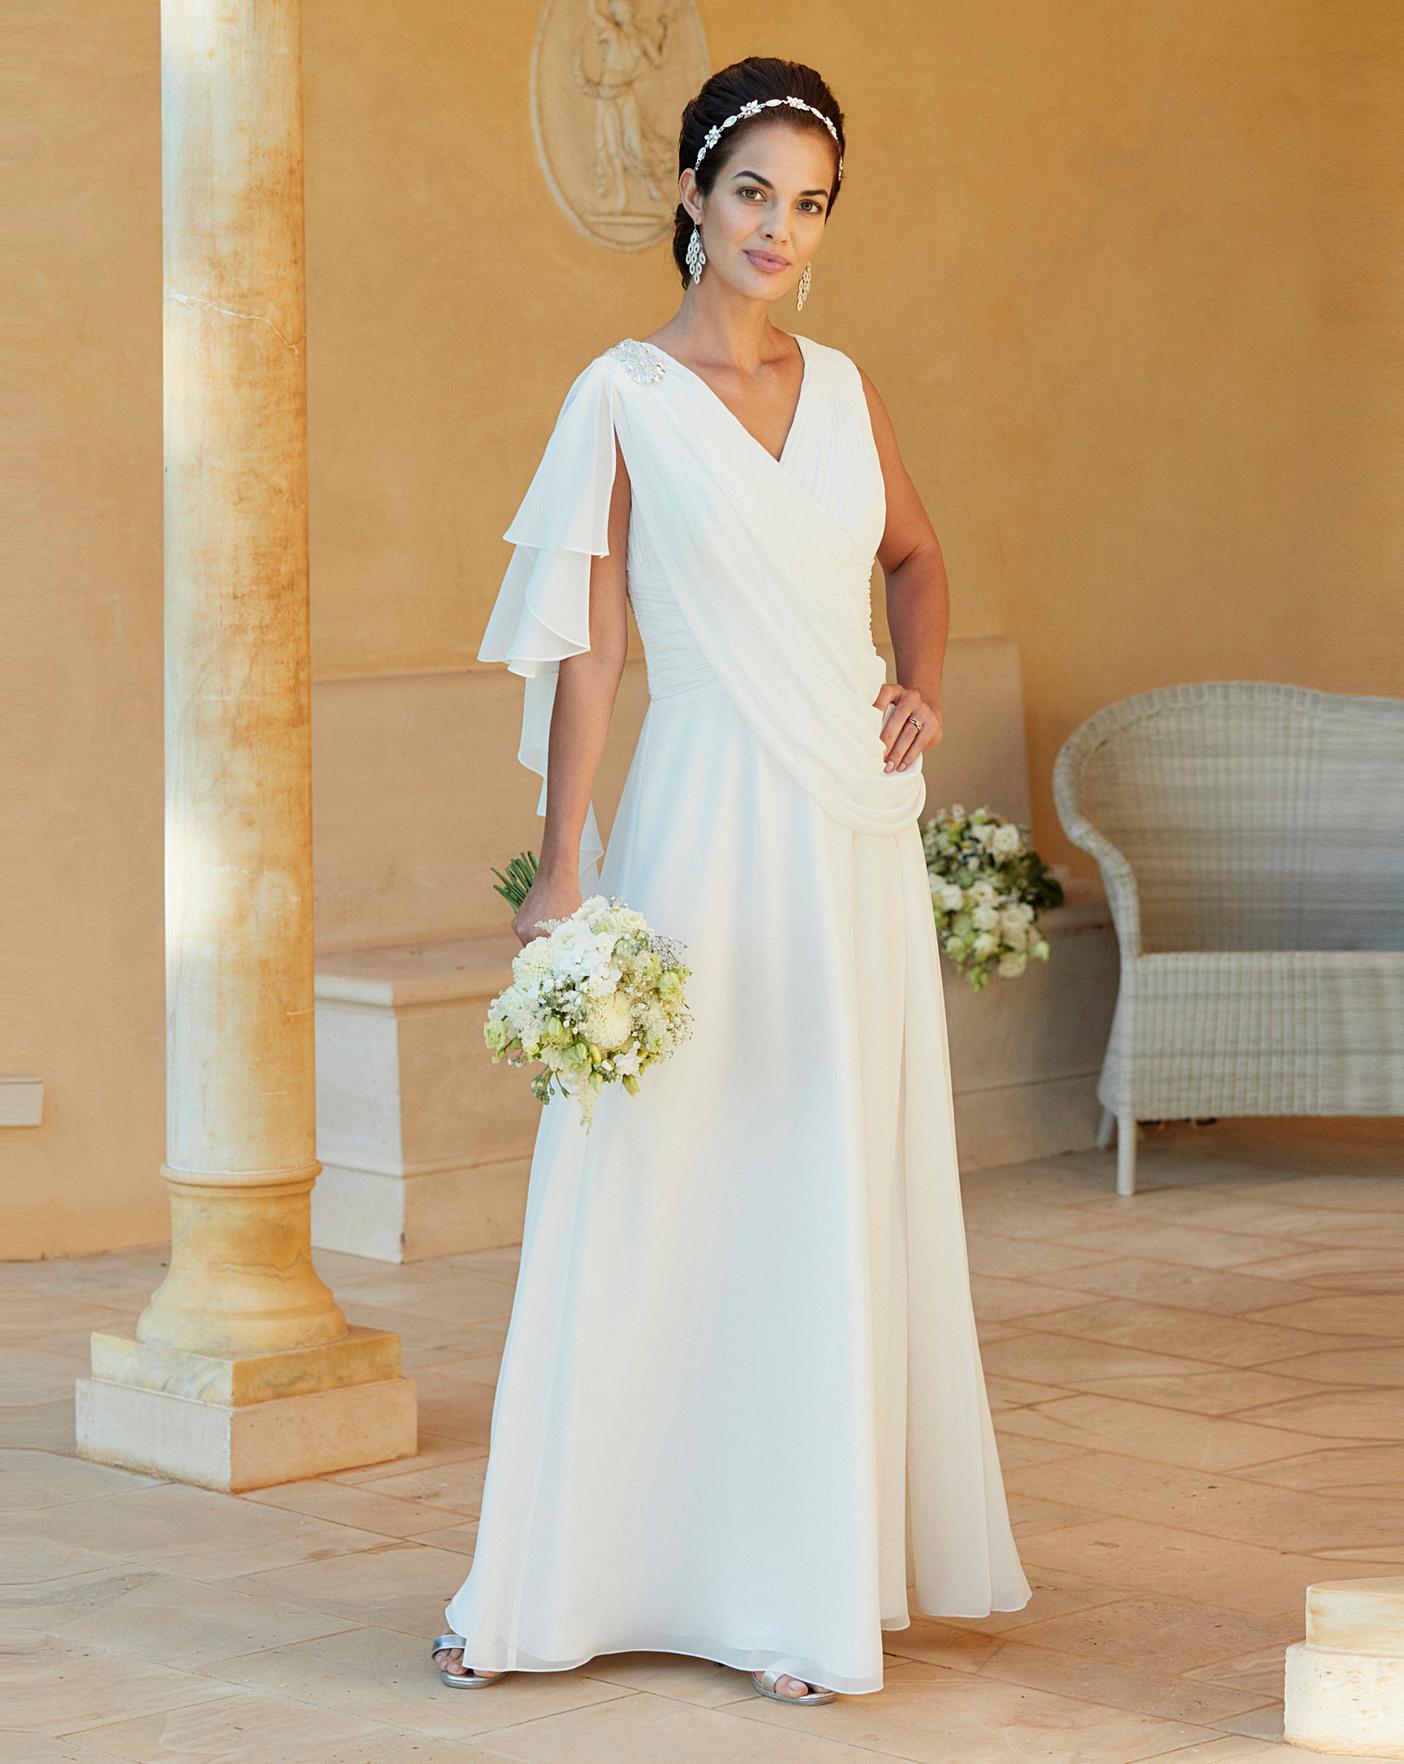 oxendales dresses for weddings